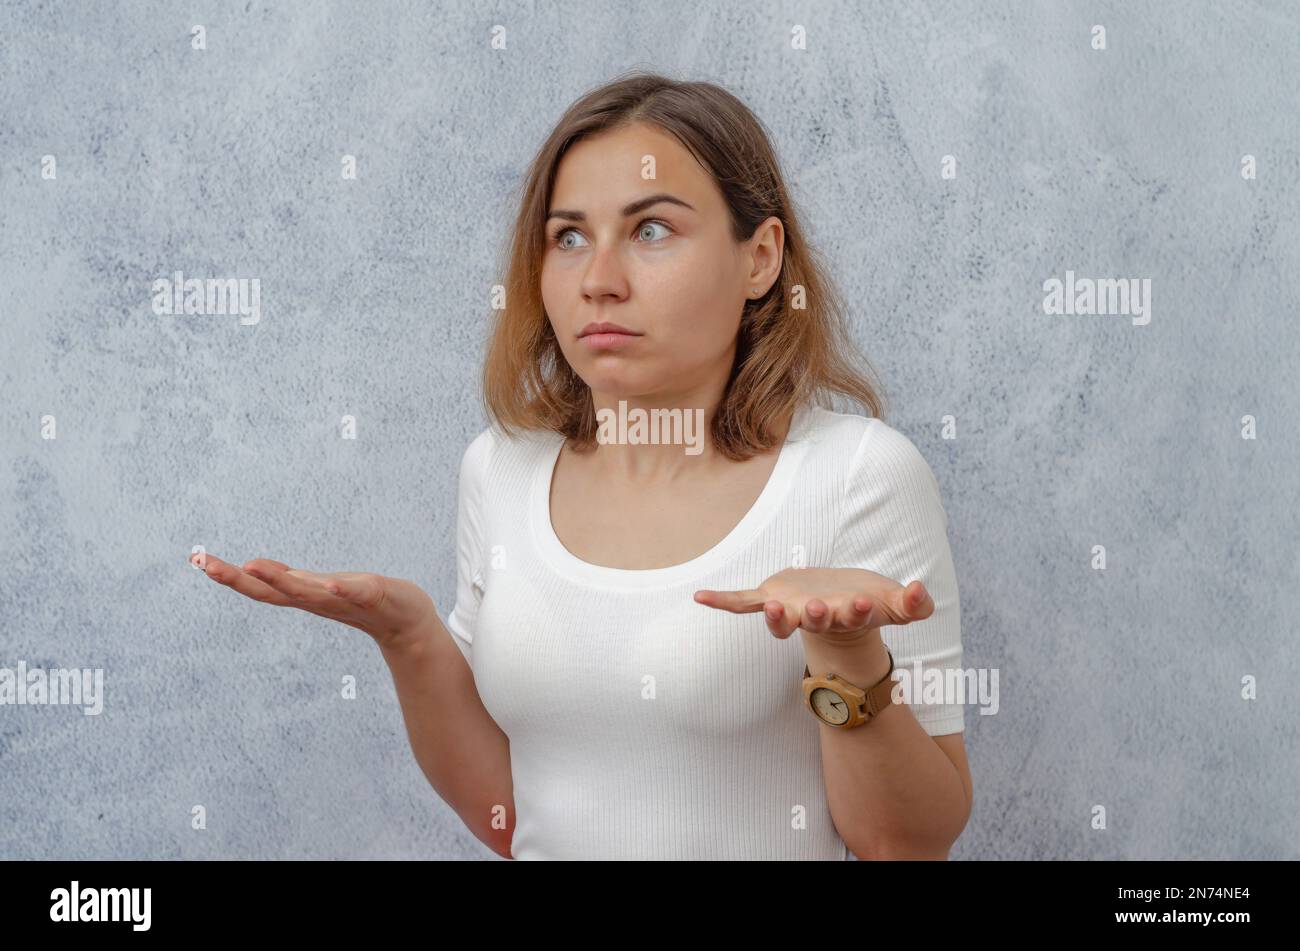 Young girl in an emotional state of misunderstanding, surprise Stock Photo